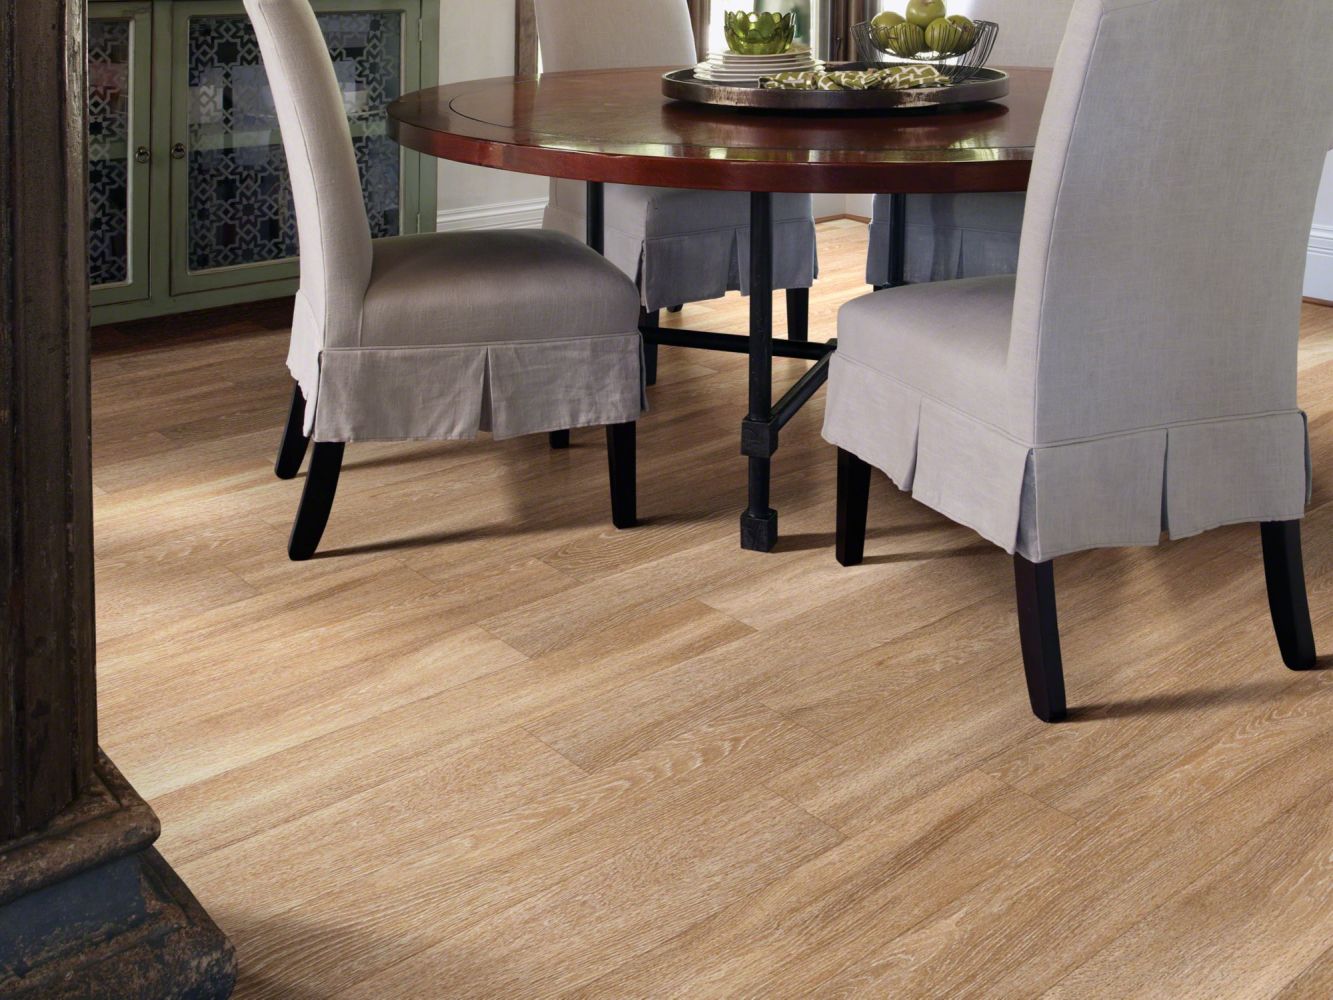 Shaw Floors Exclusive Pacific Coast12 Brussels 00235_1029V